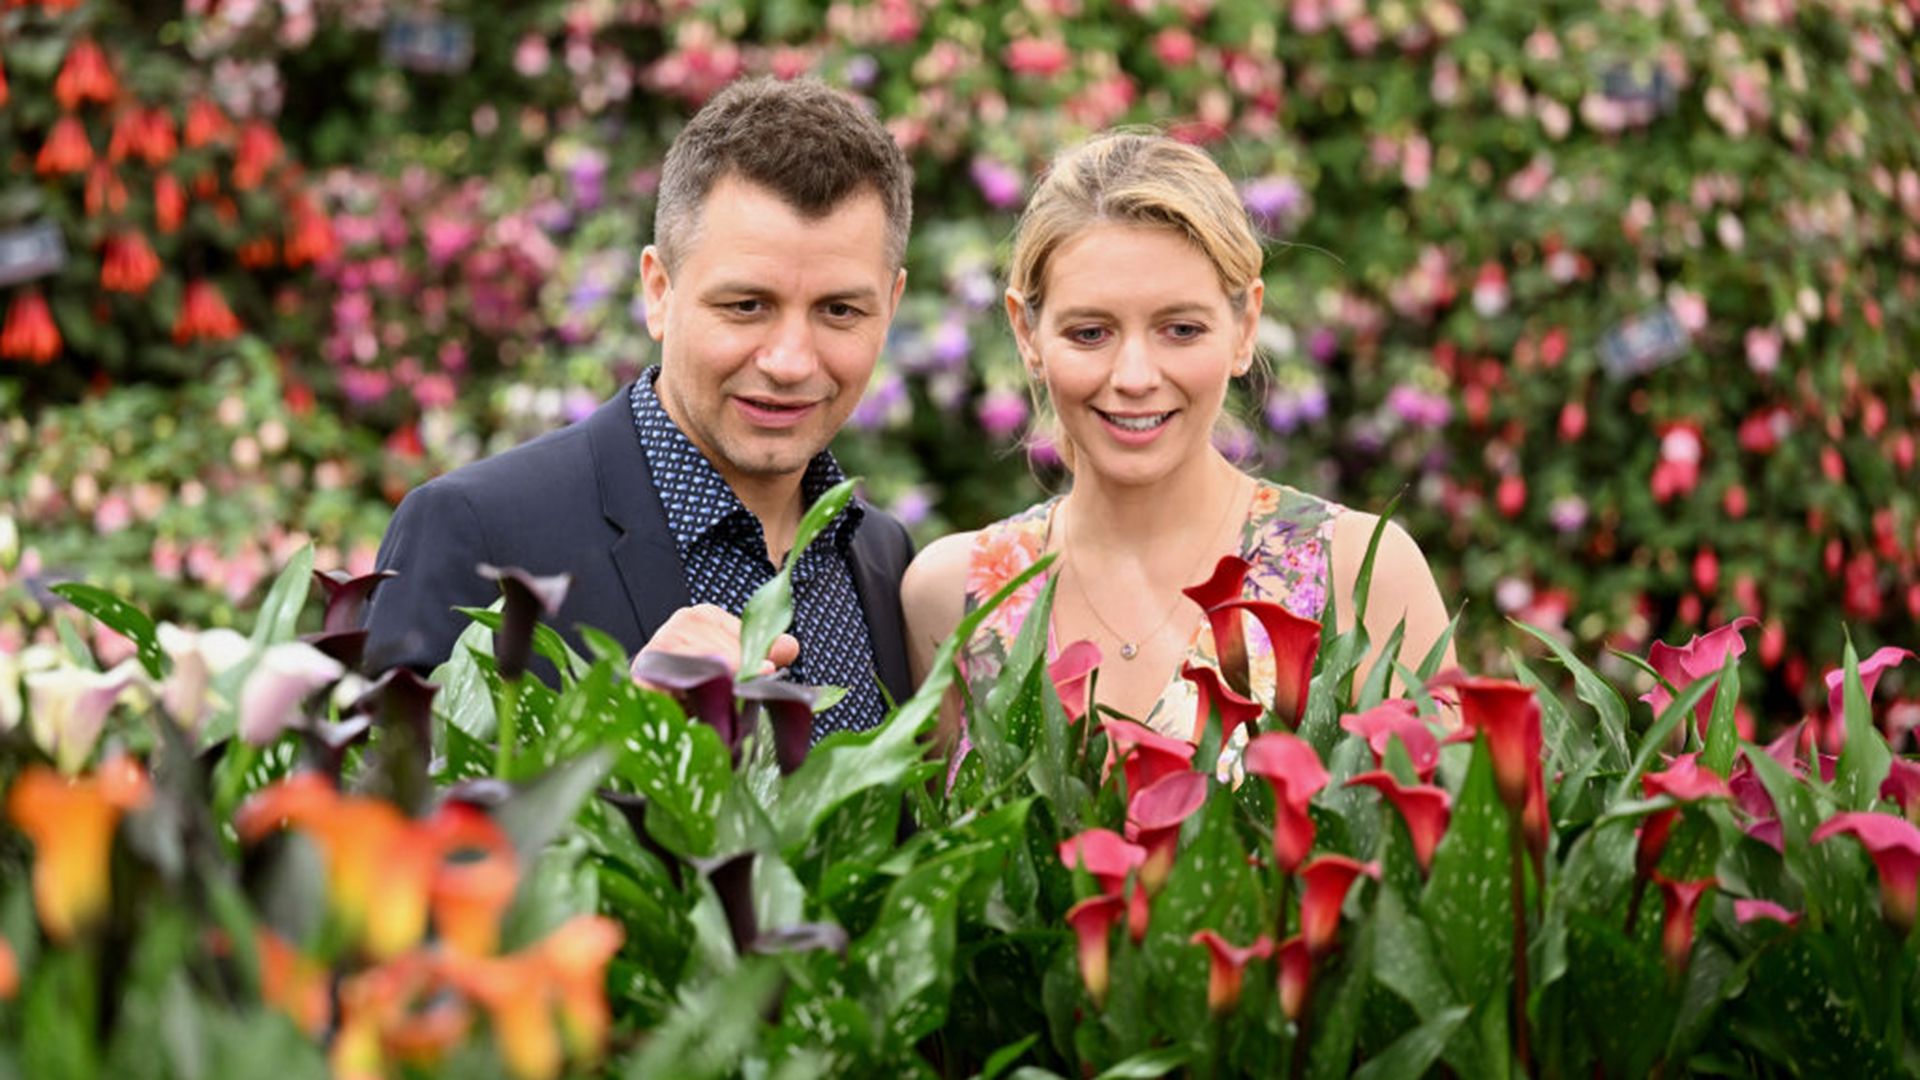 Rachel Riley and Pasha Kovalev at the Southport Flower Show